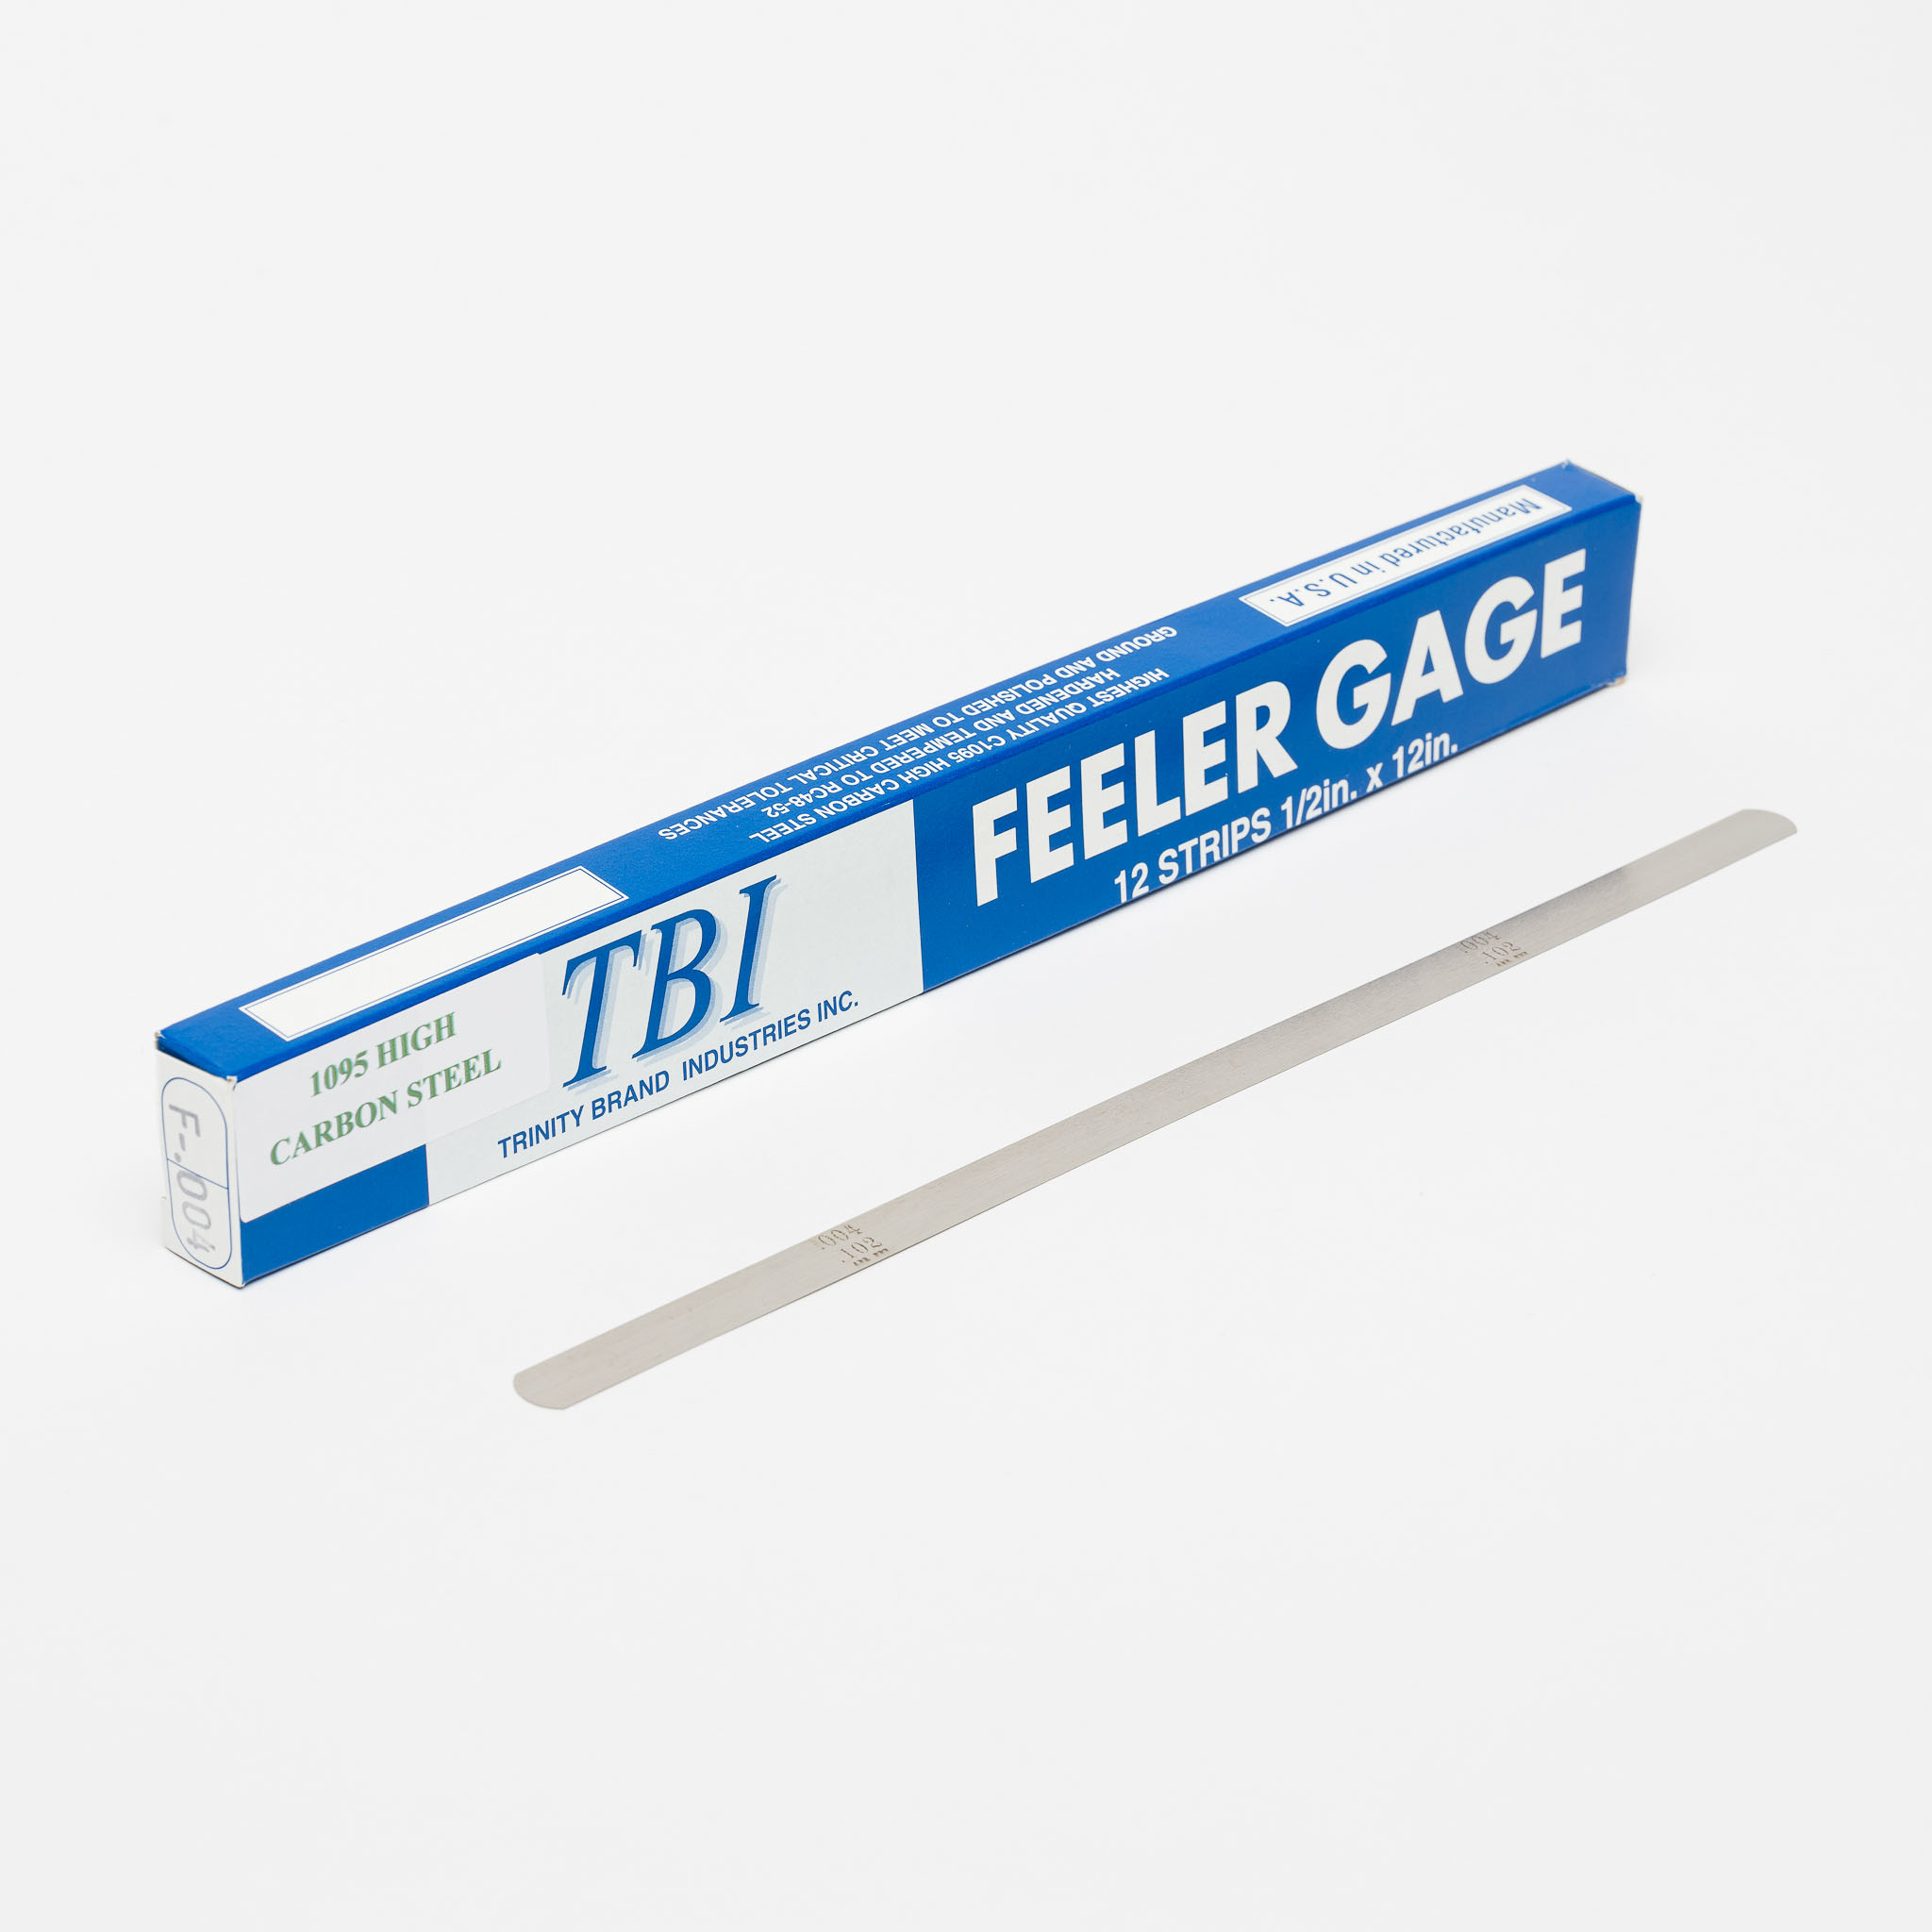 Item F 4 0 004 Inch In Thickness Steel Feeler Gage Strip On